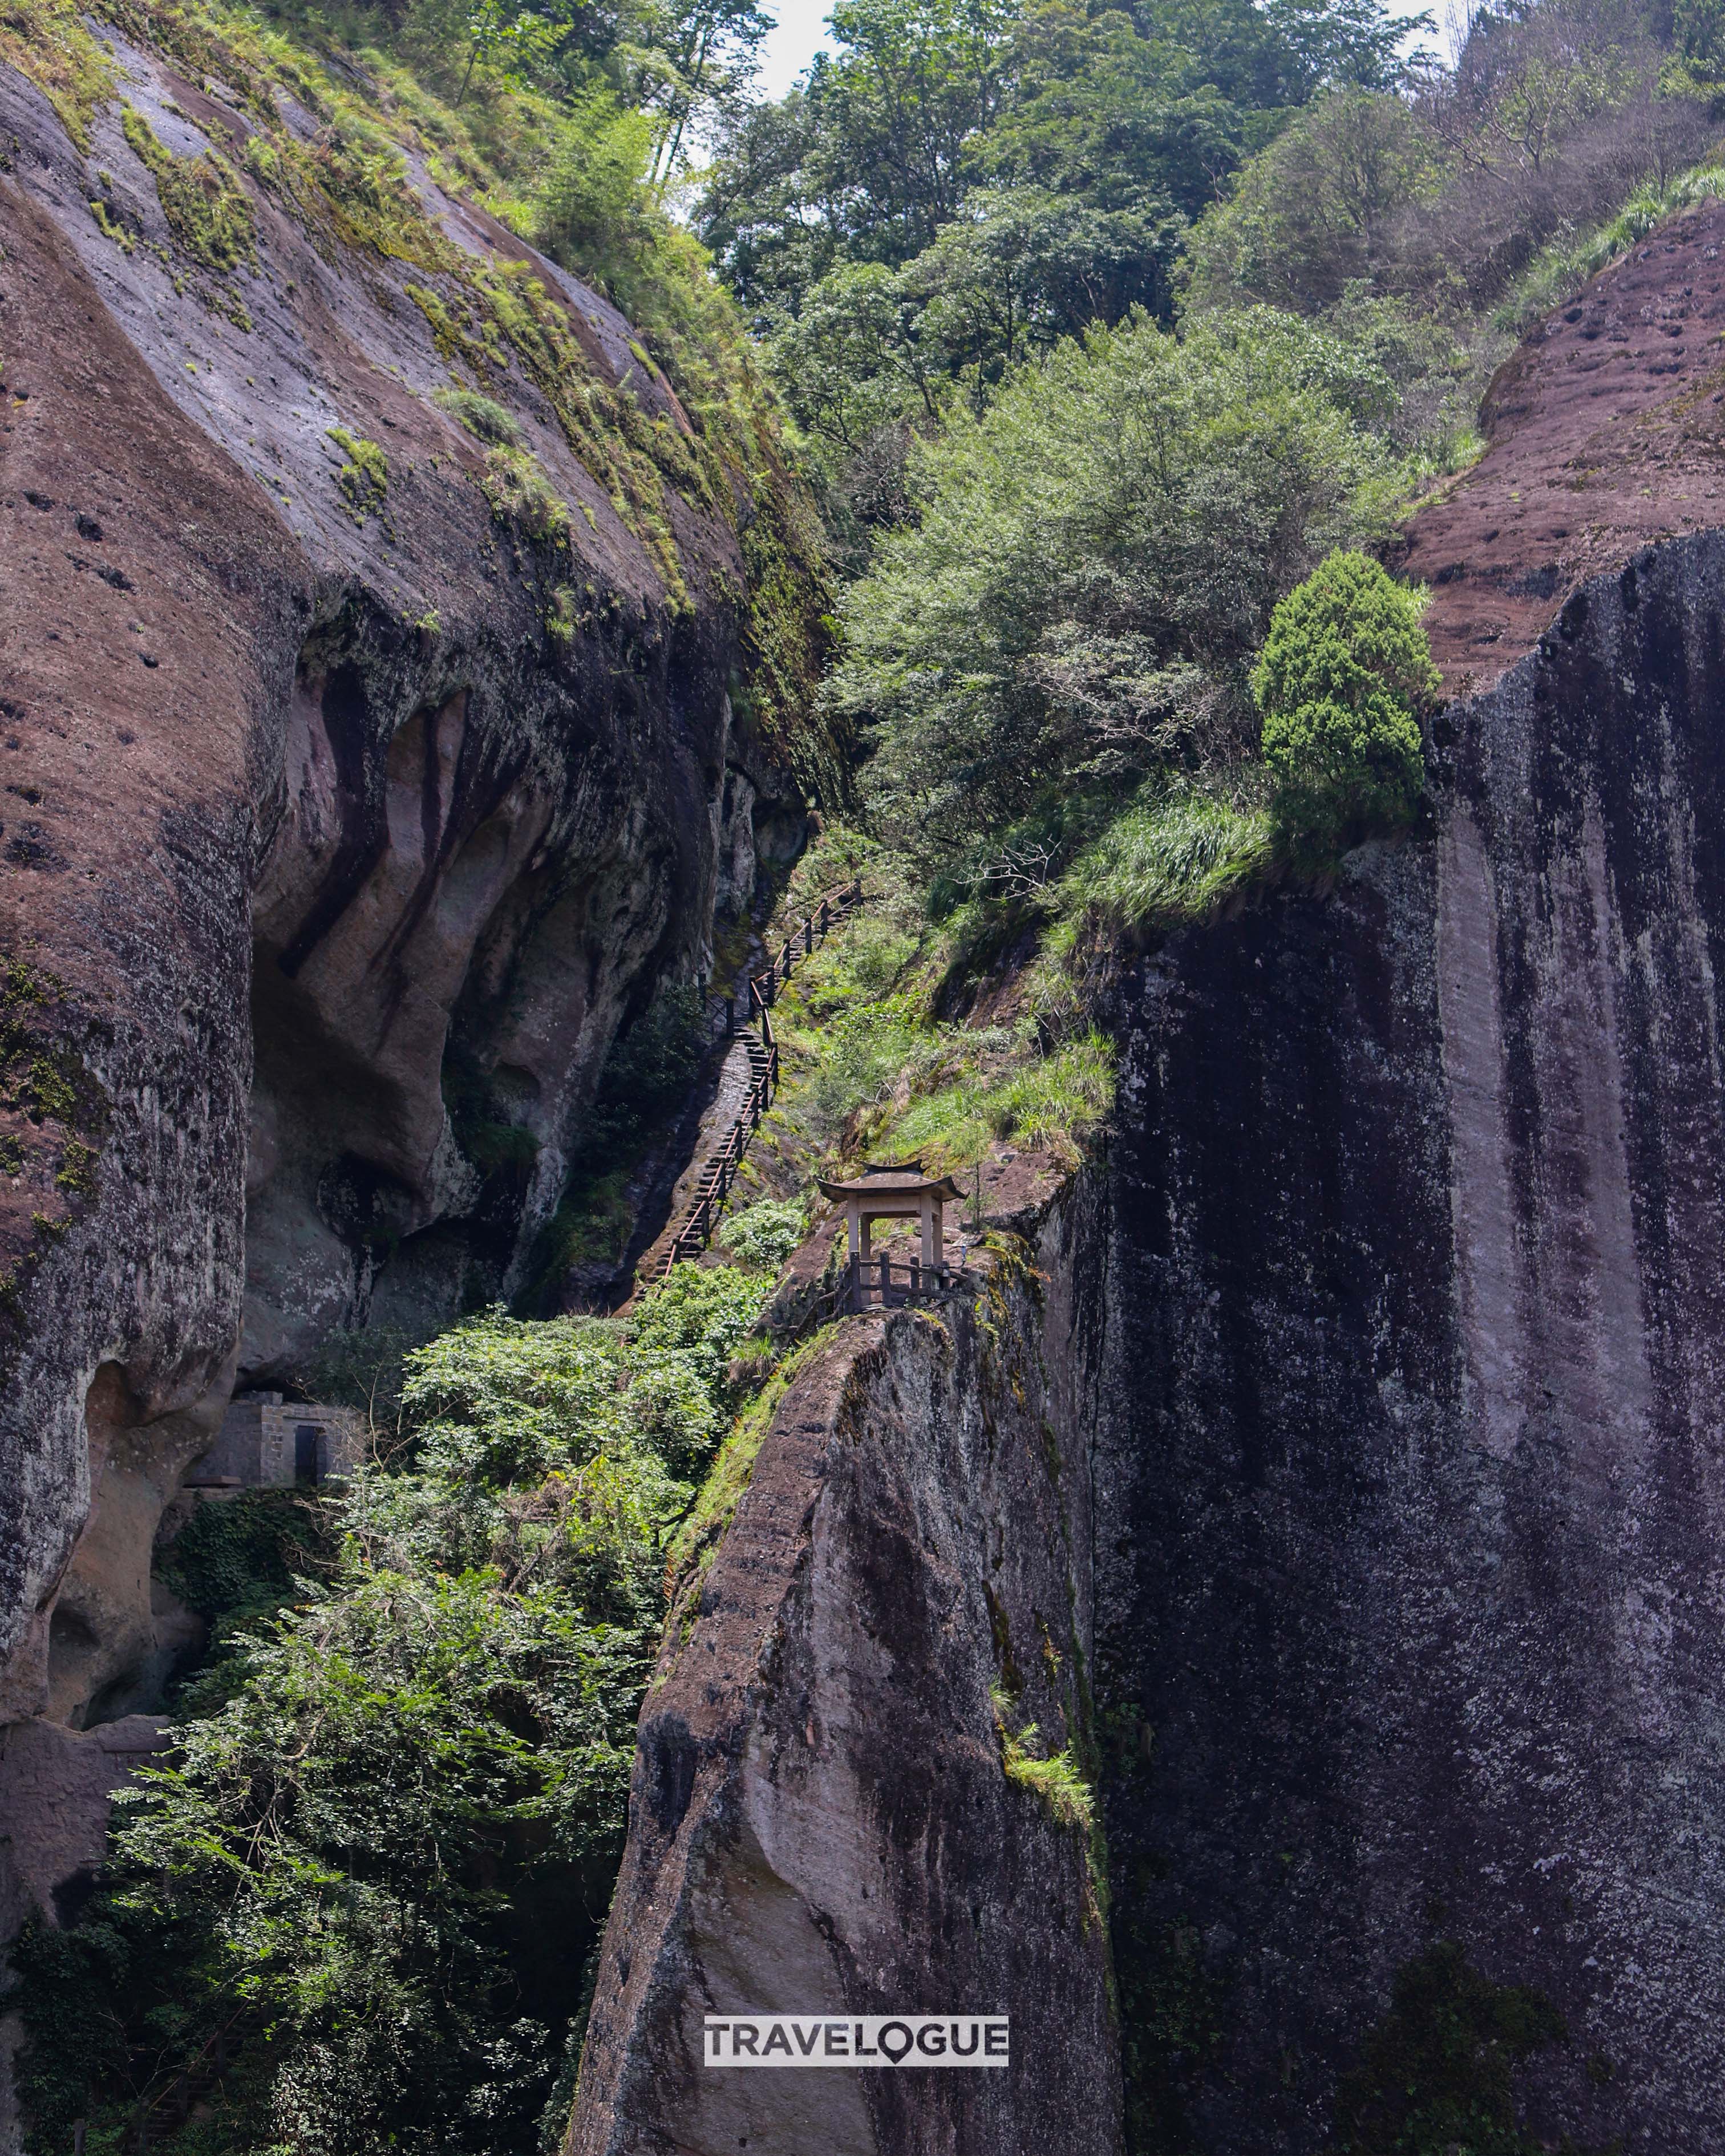 An undated photo shows the view of the Wuyi Mountain in southeast China's Fujian Province. /CGTN